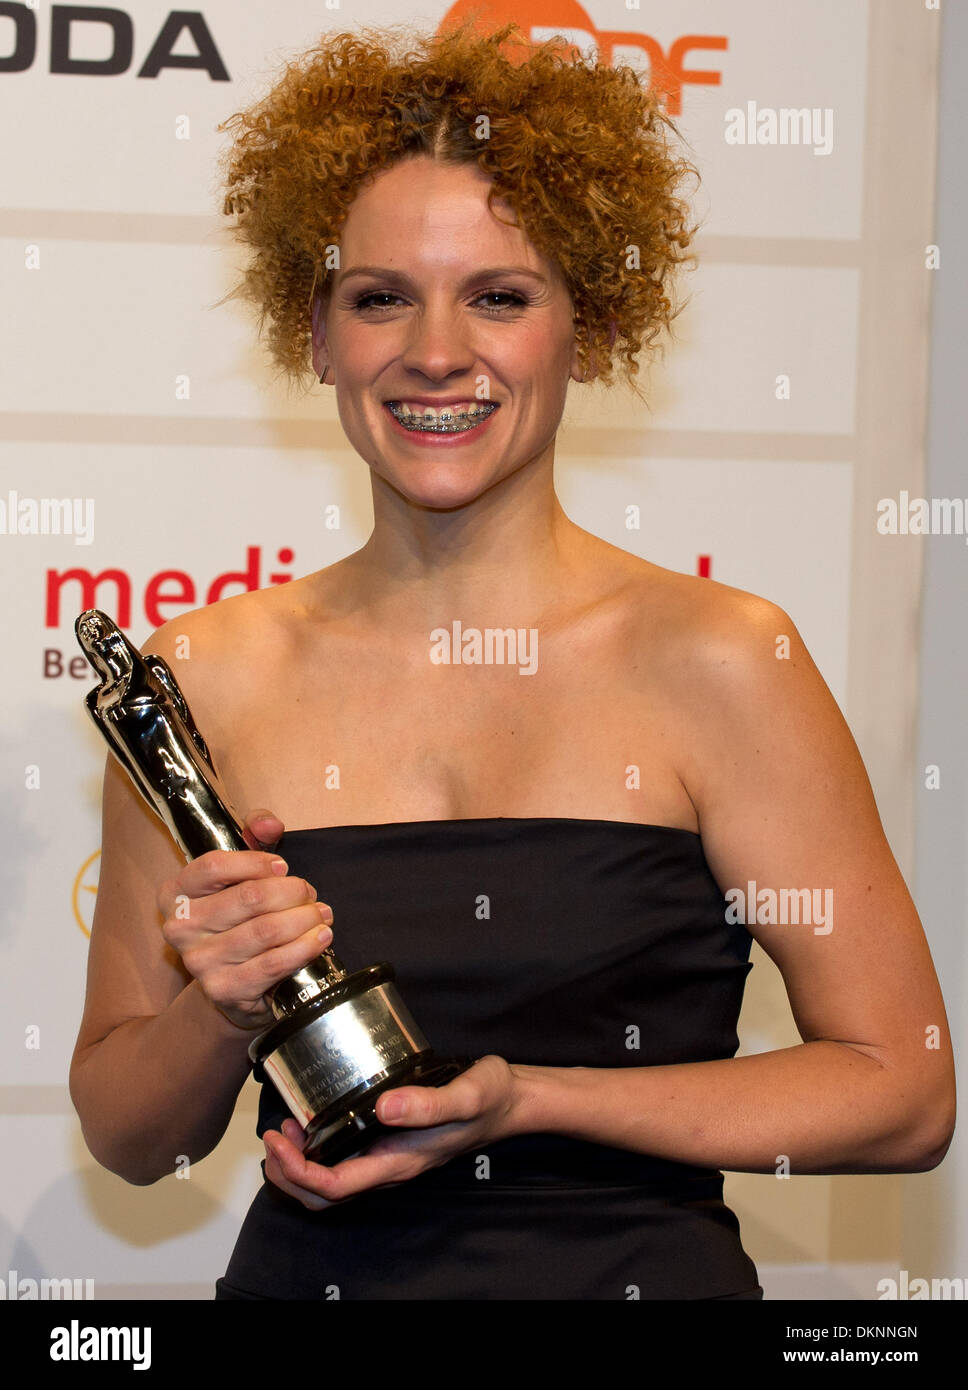 Berlin, Germany. 7th Dec, 2013. Actress Veerle Baetens poses with her award she received in the category 'Best Actress' after the 26th European Film Awards in Berlin, Germany, 7 December 2013. Photo: Tim Brakemeier/dpa/Alamy Live News Stock Photo